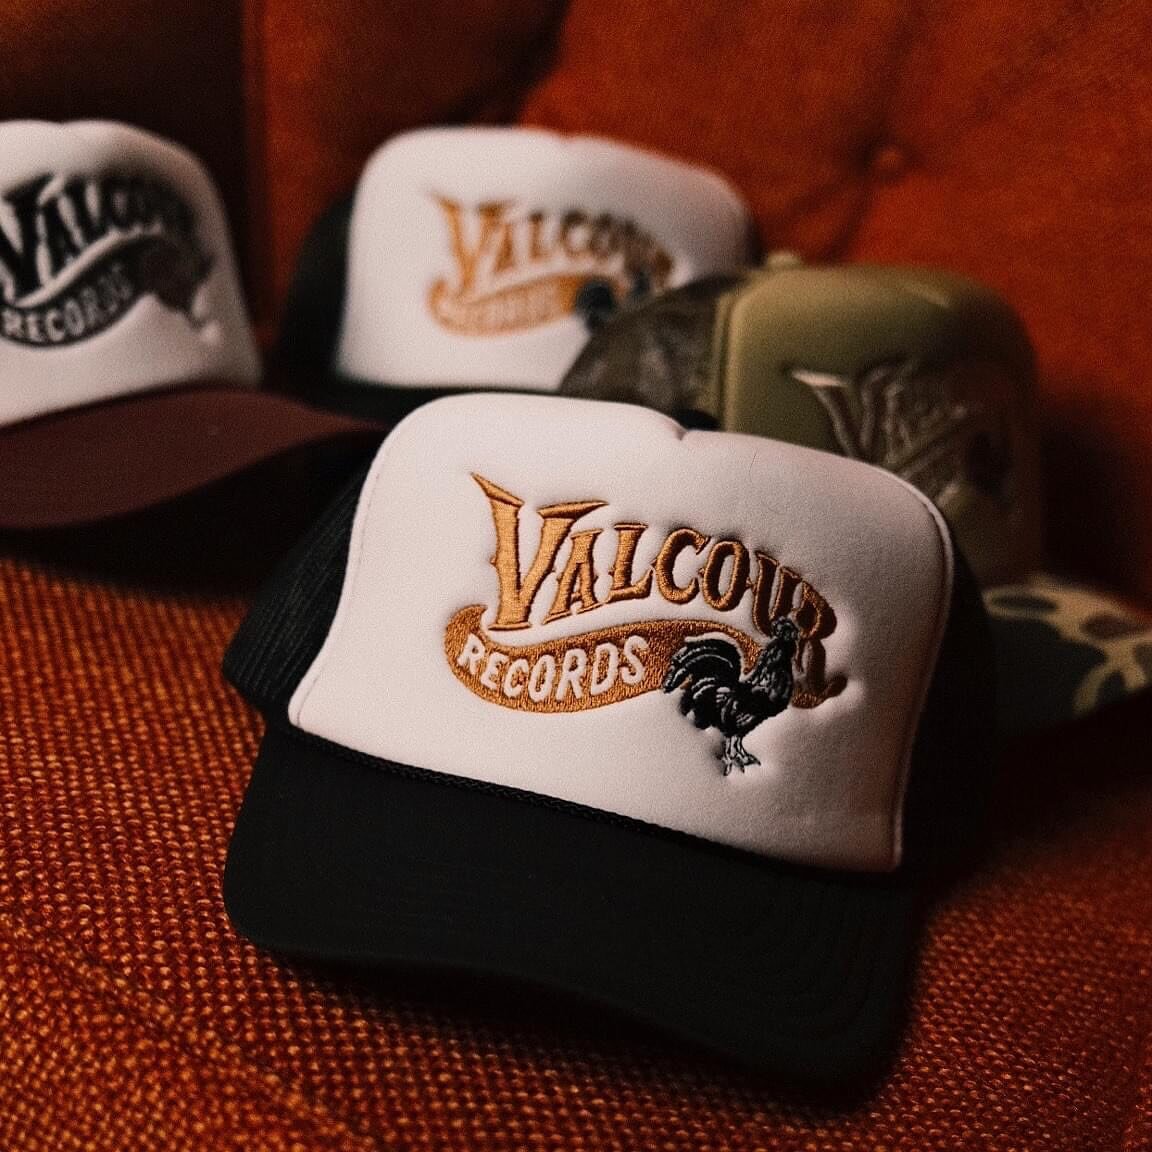 Merch restock alert! After a busy holiday season, we&rsquo;ve finally restocked our small / medium shirts and hats, and have all of our other new merch ready to go as well. Get your Valcour gear ready for Mardi Gras and festival season at the website